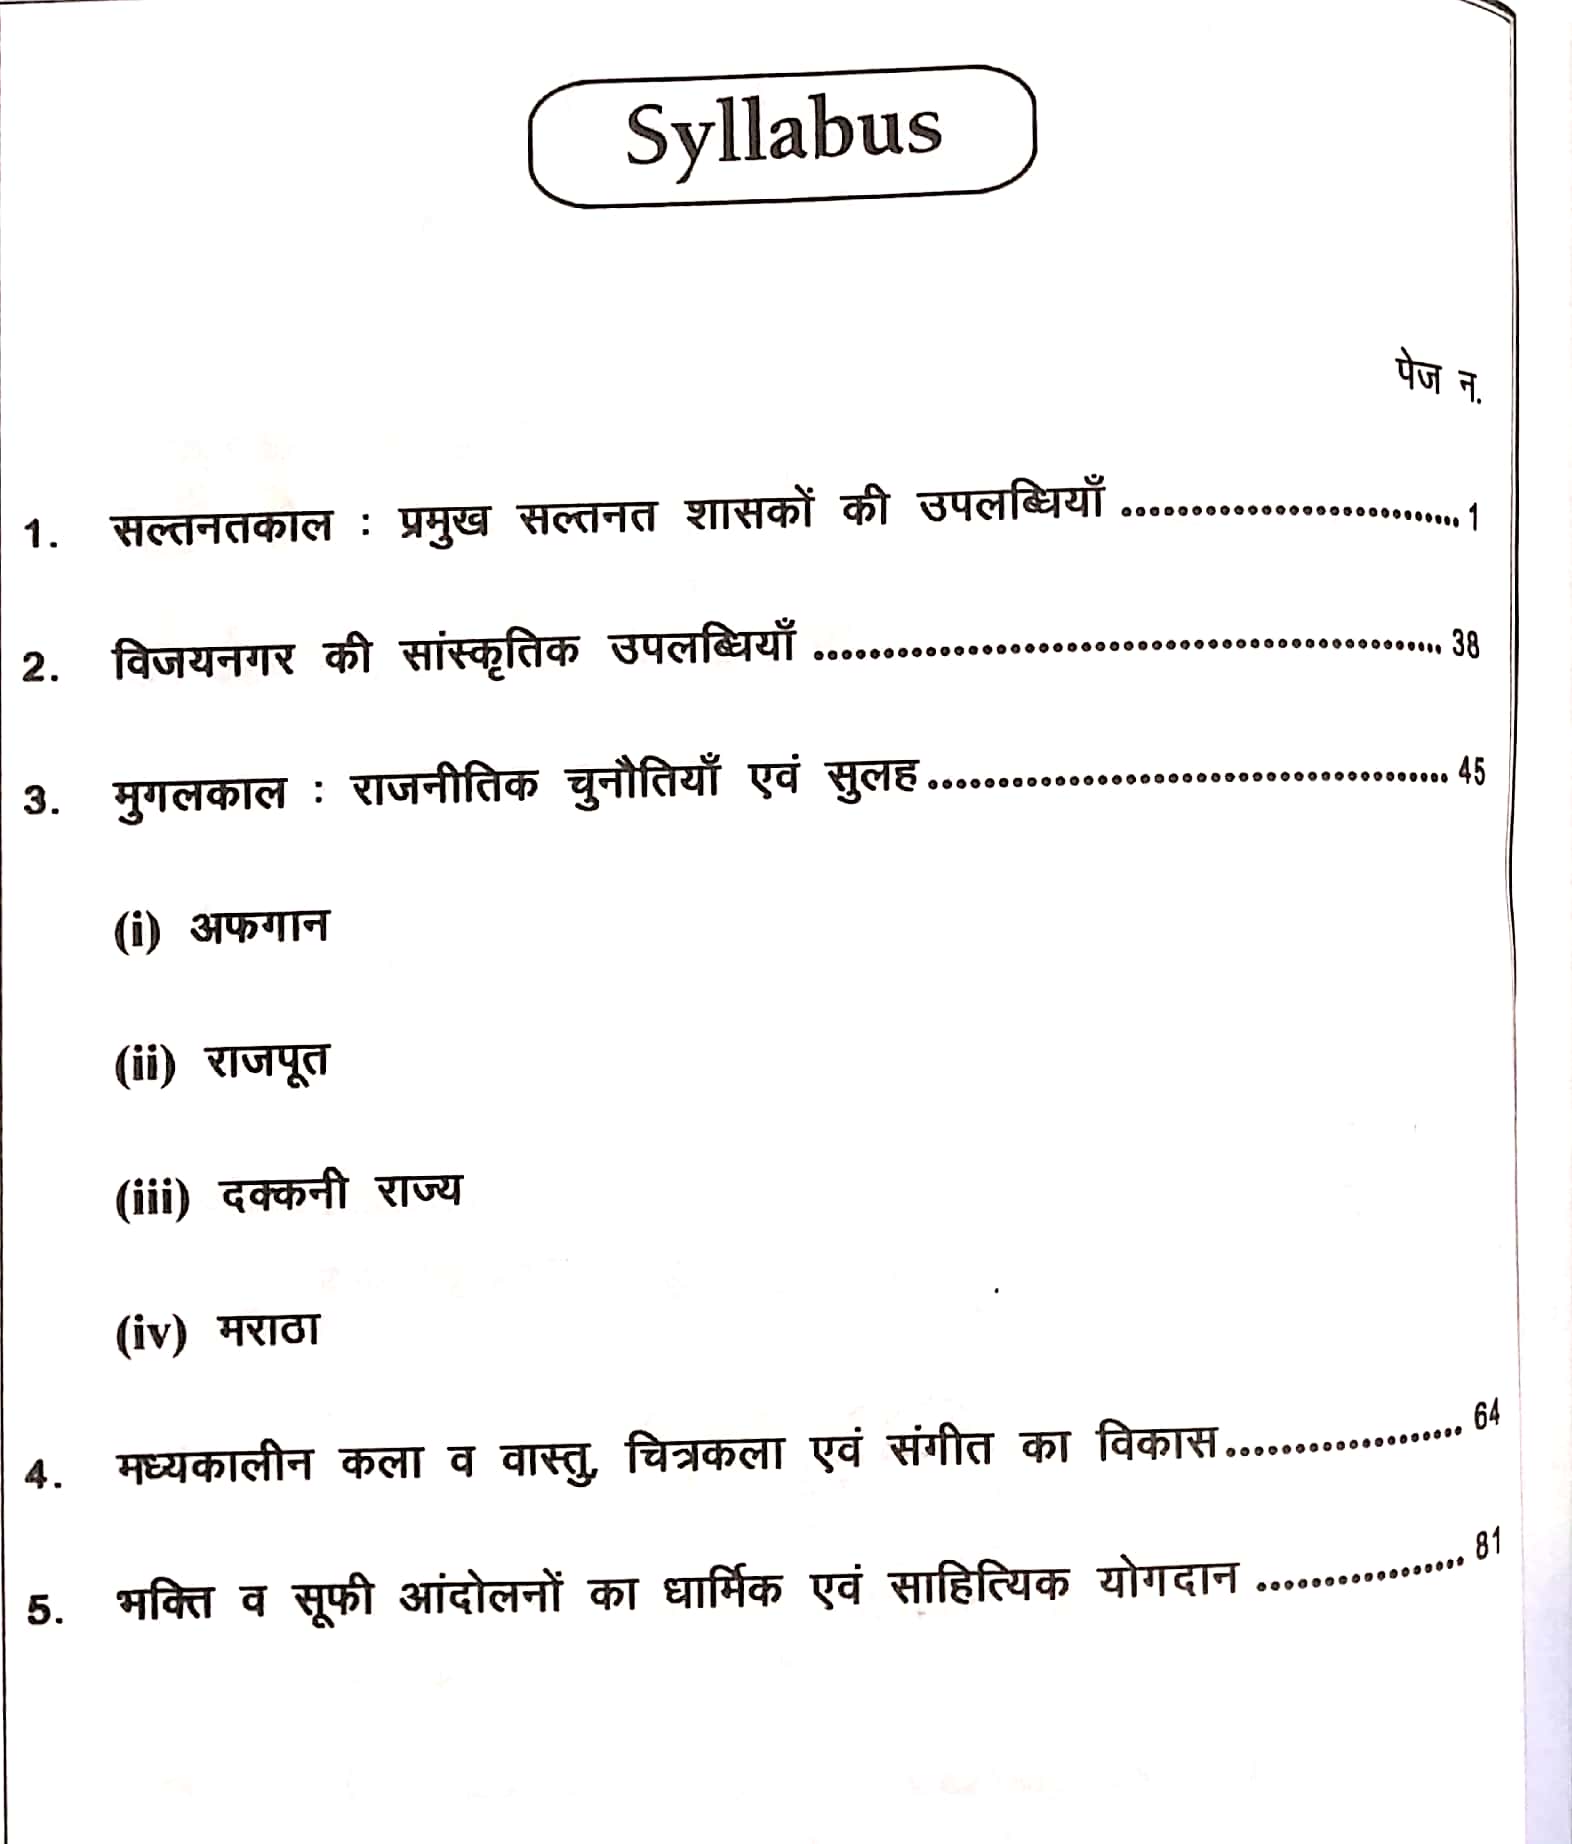 Mahecha Spring Board Academy RAS Fundation History of Medieval India (madhyakaaleen bhaarat ka itihaas) By Narendra Singh Ranawat For All Competitive Exam Latest Edition